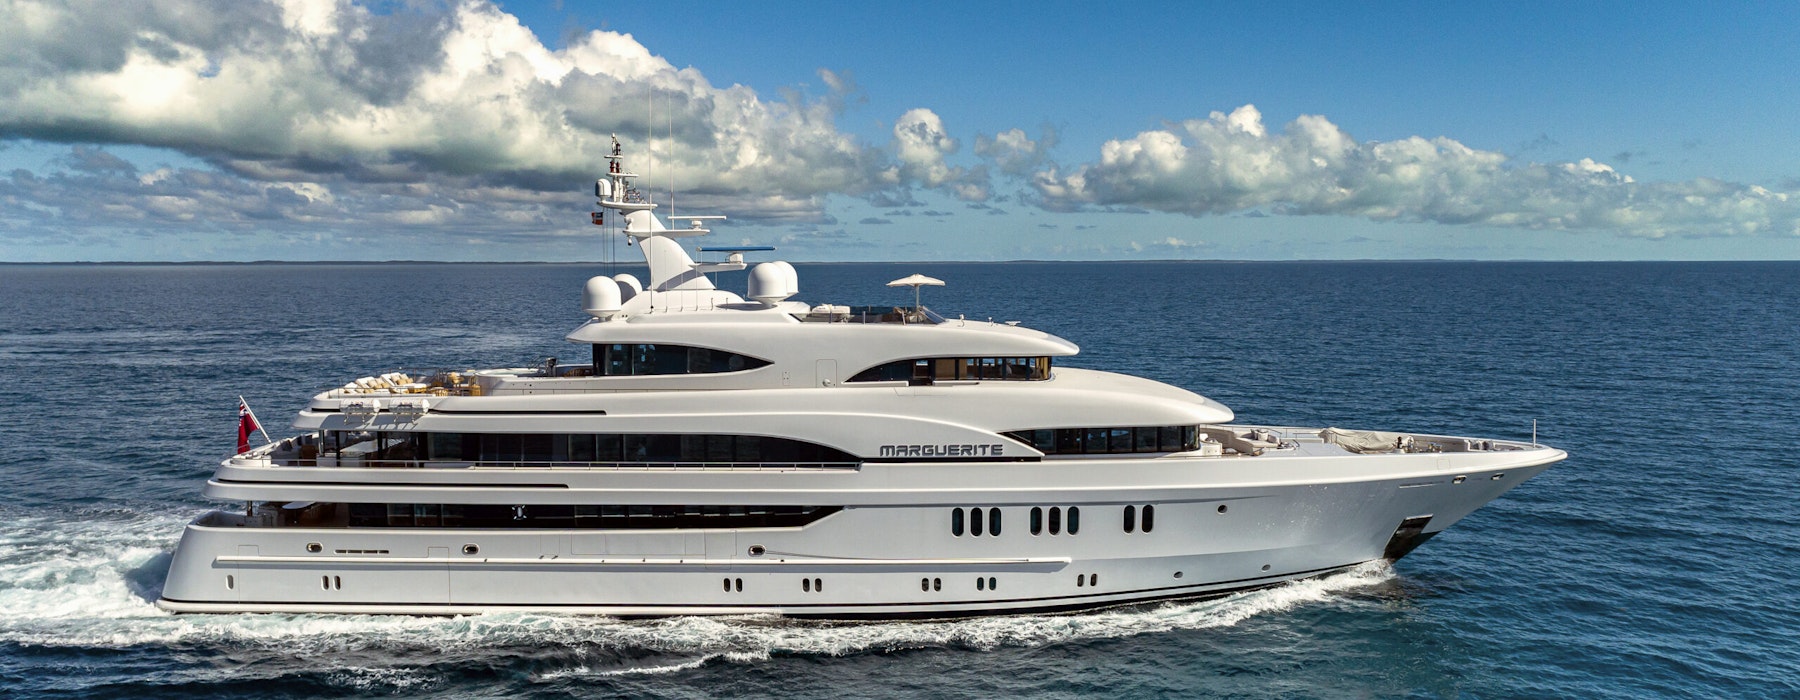 Charter a yacht with Moran Yacht & Ship in time for the Monaco Grand Prix